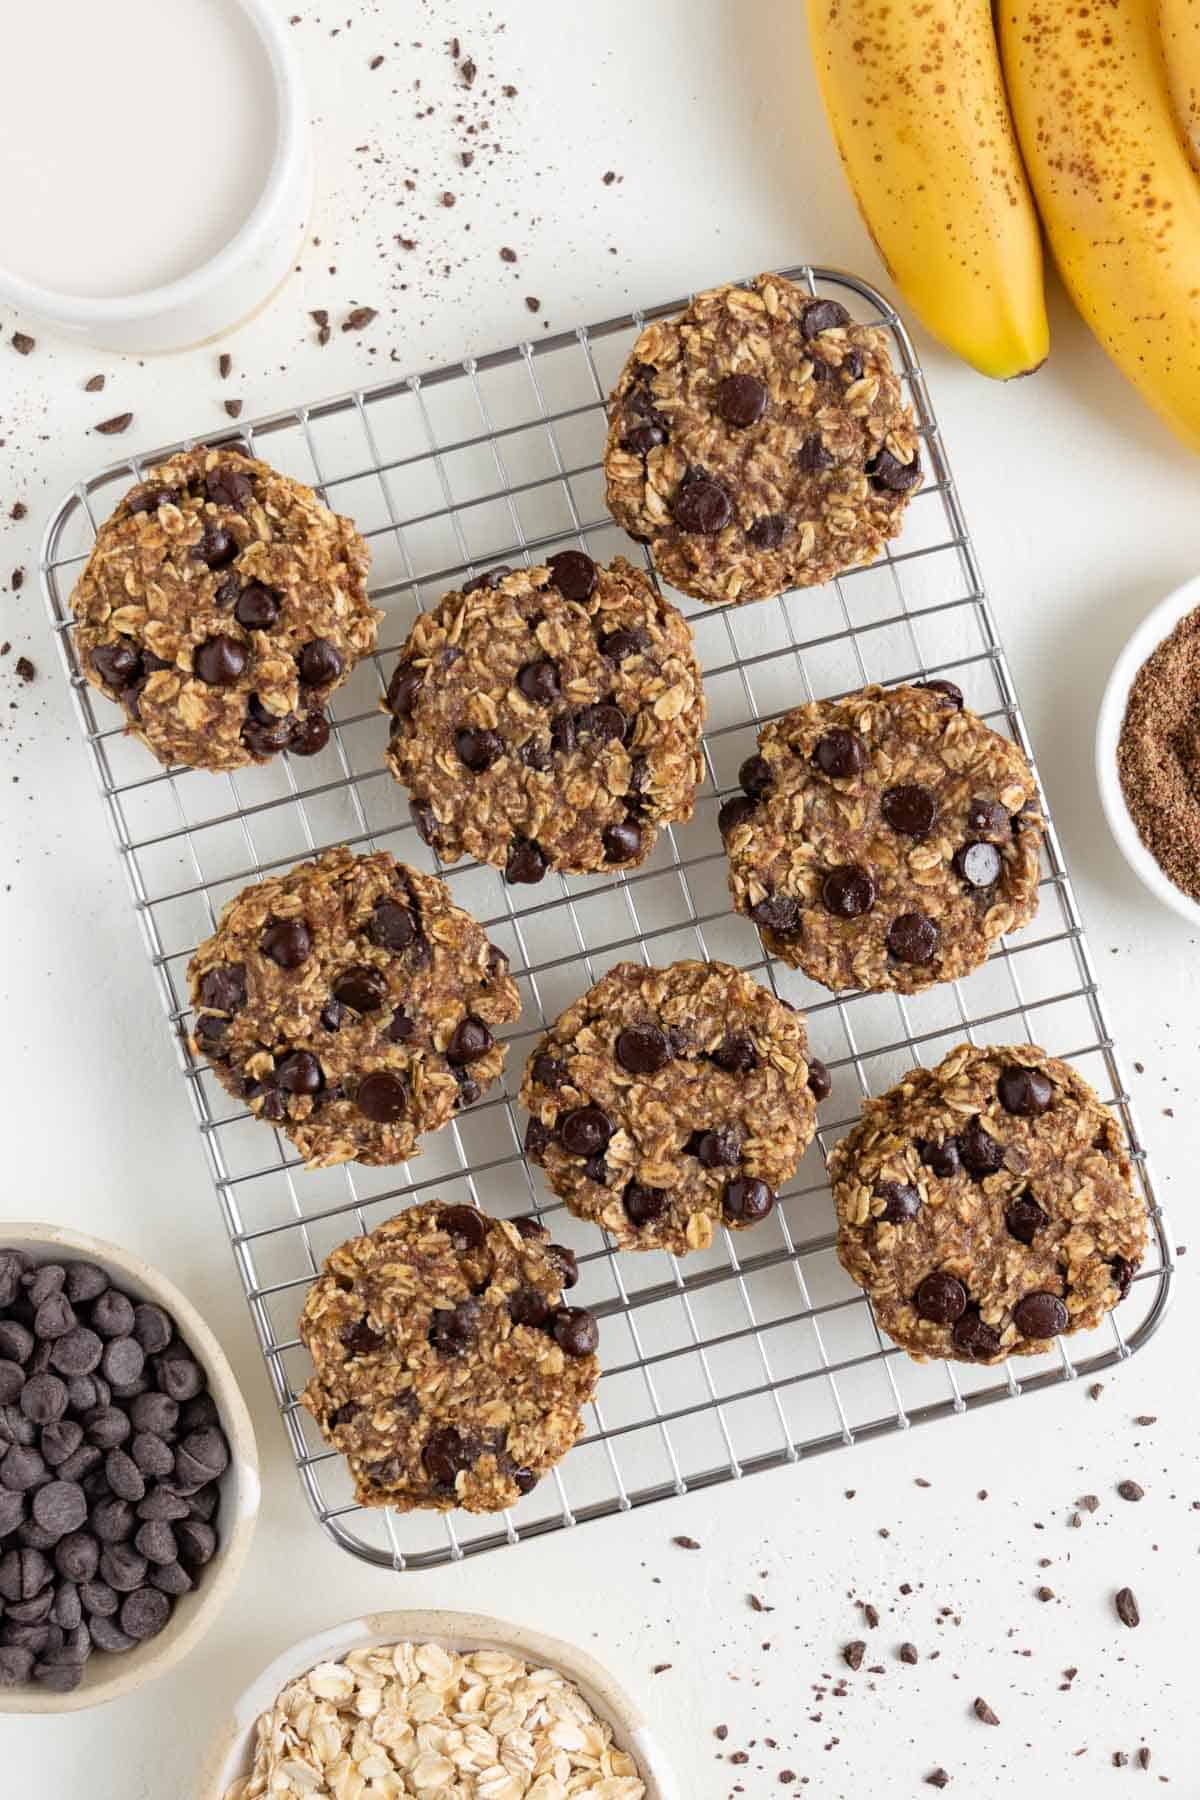 eight banana oatmeal chocolate chip cookies on a wire cooling rack surrounded by a bundle of bananas, oats, and a glass of almond milk